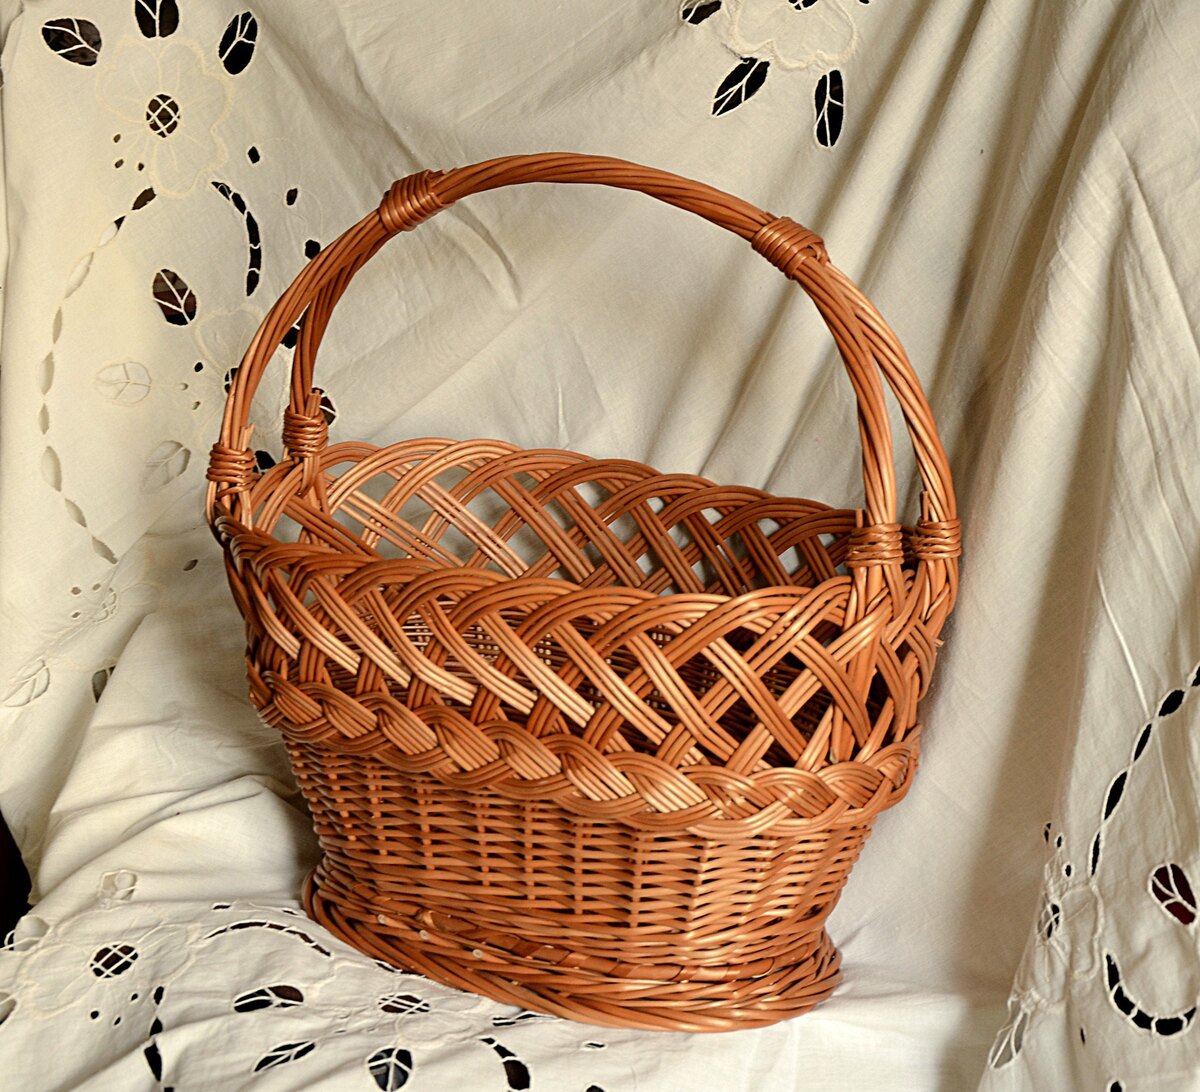 What Are Wicker Baskets Made From?